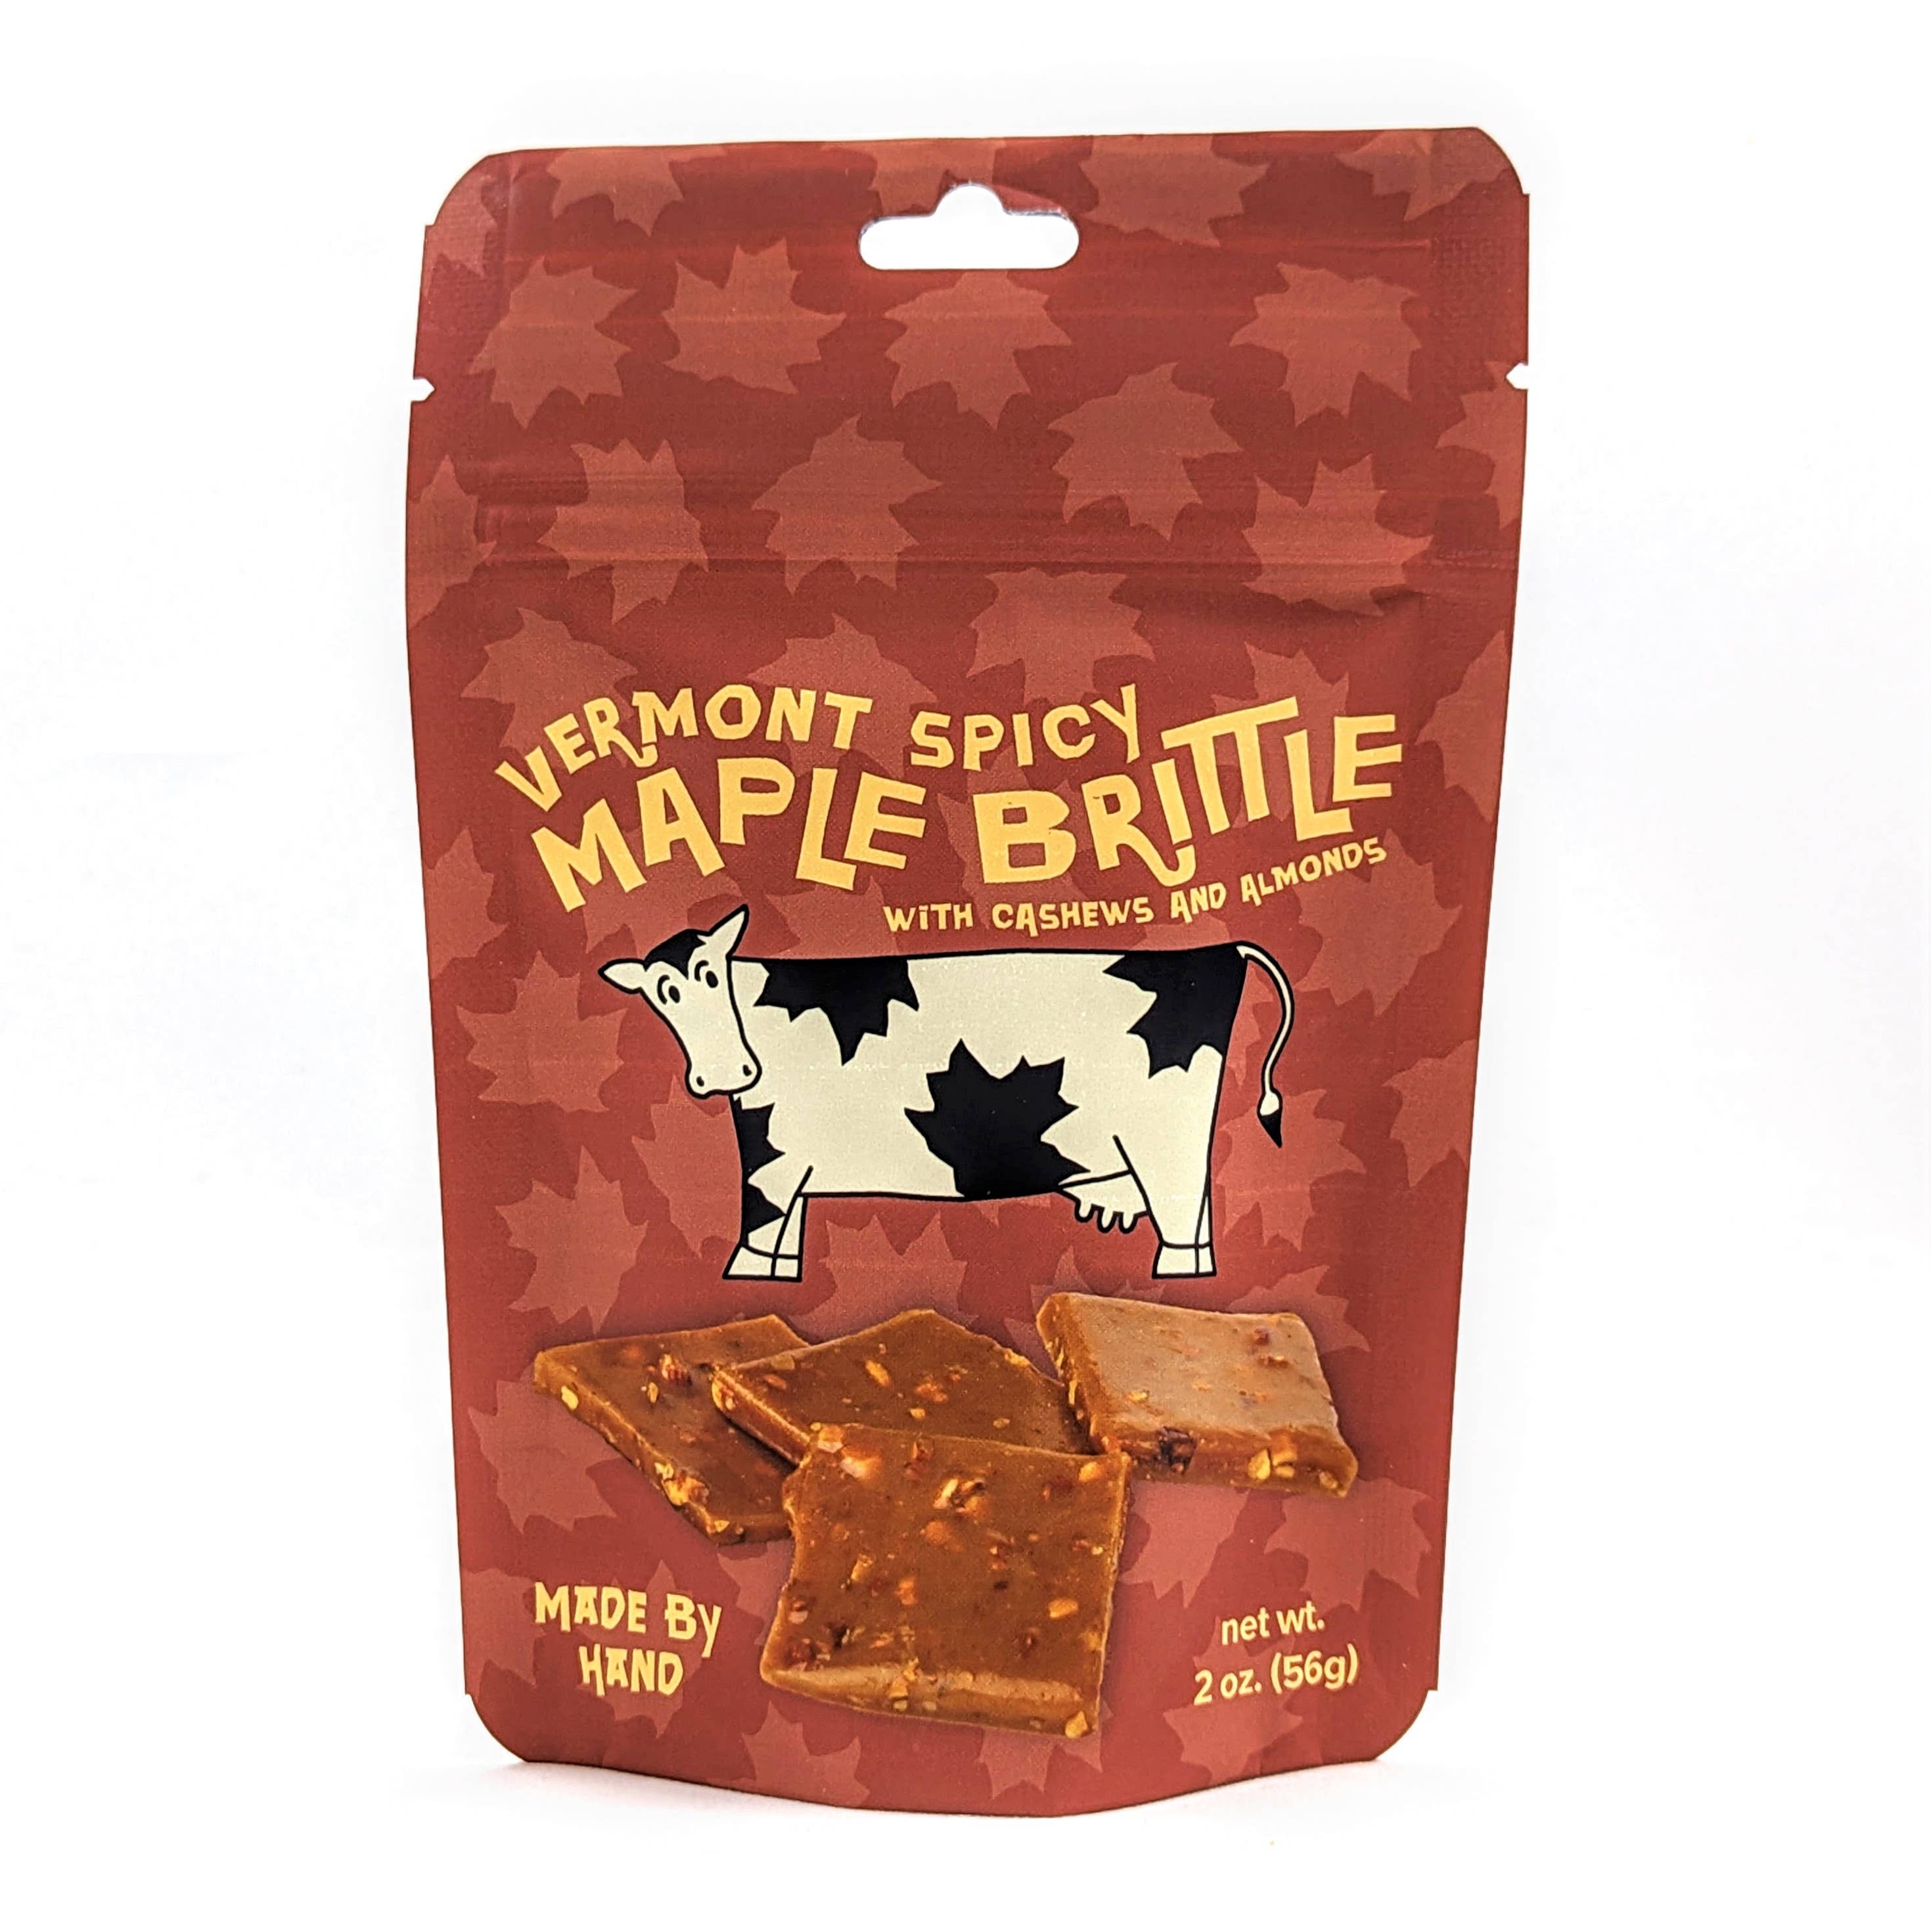 Spicy Maple Brittle With Cashews and Almonds